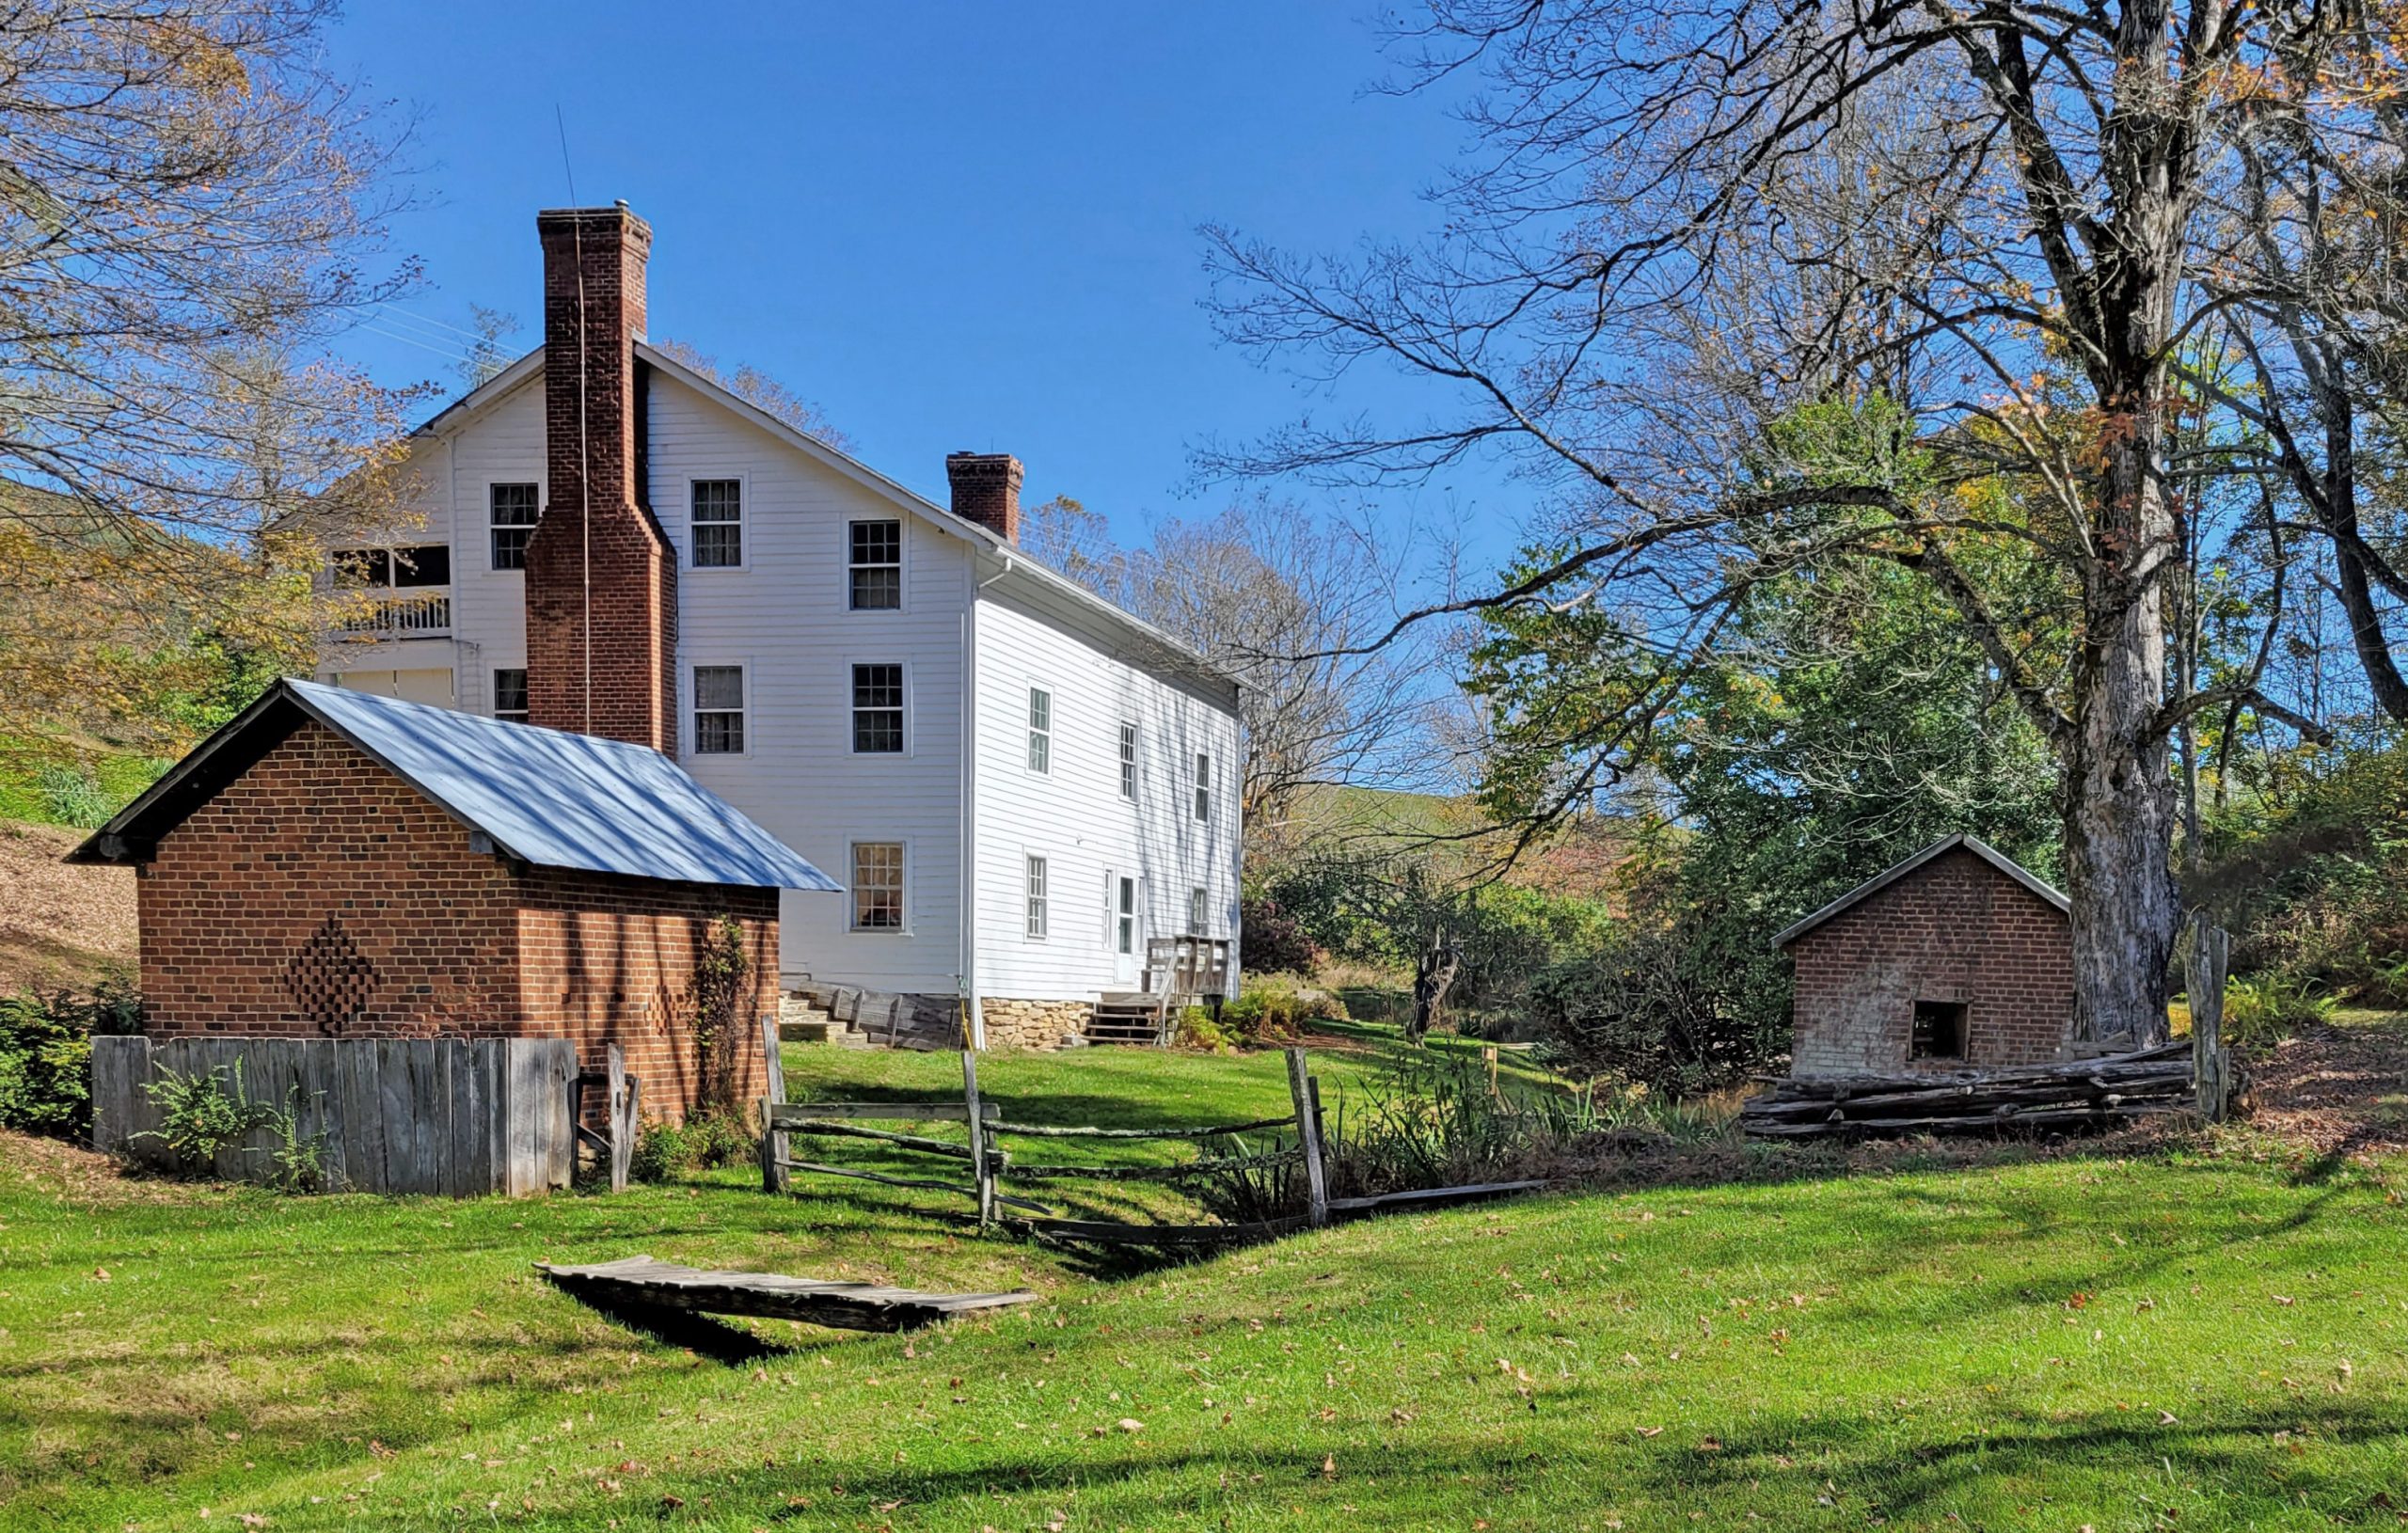 Brookside Farm and Mill